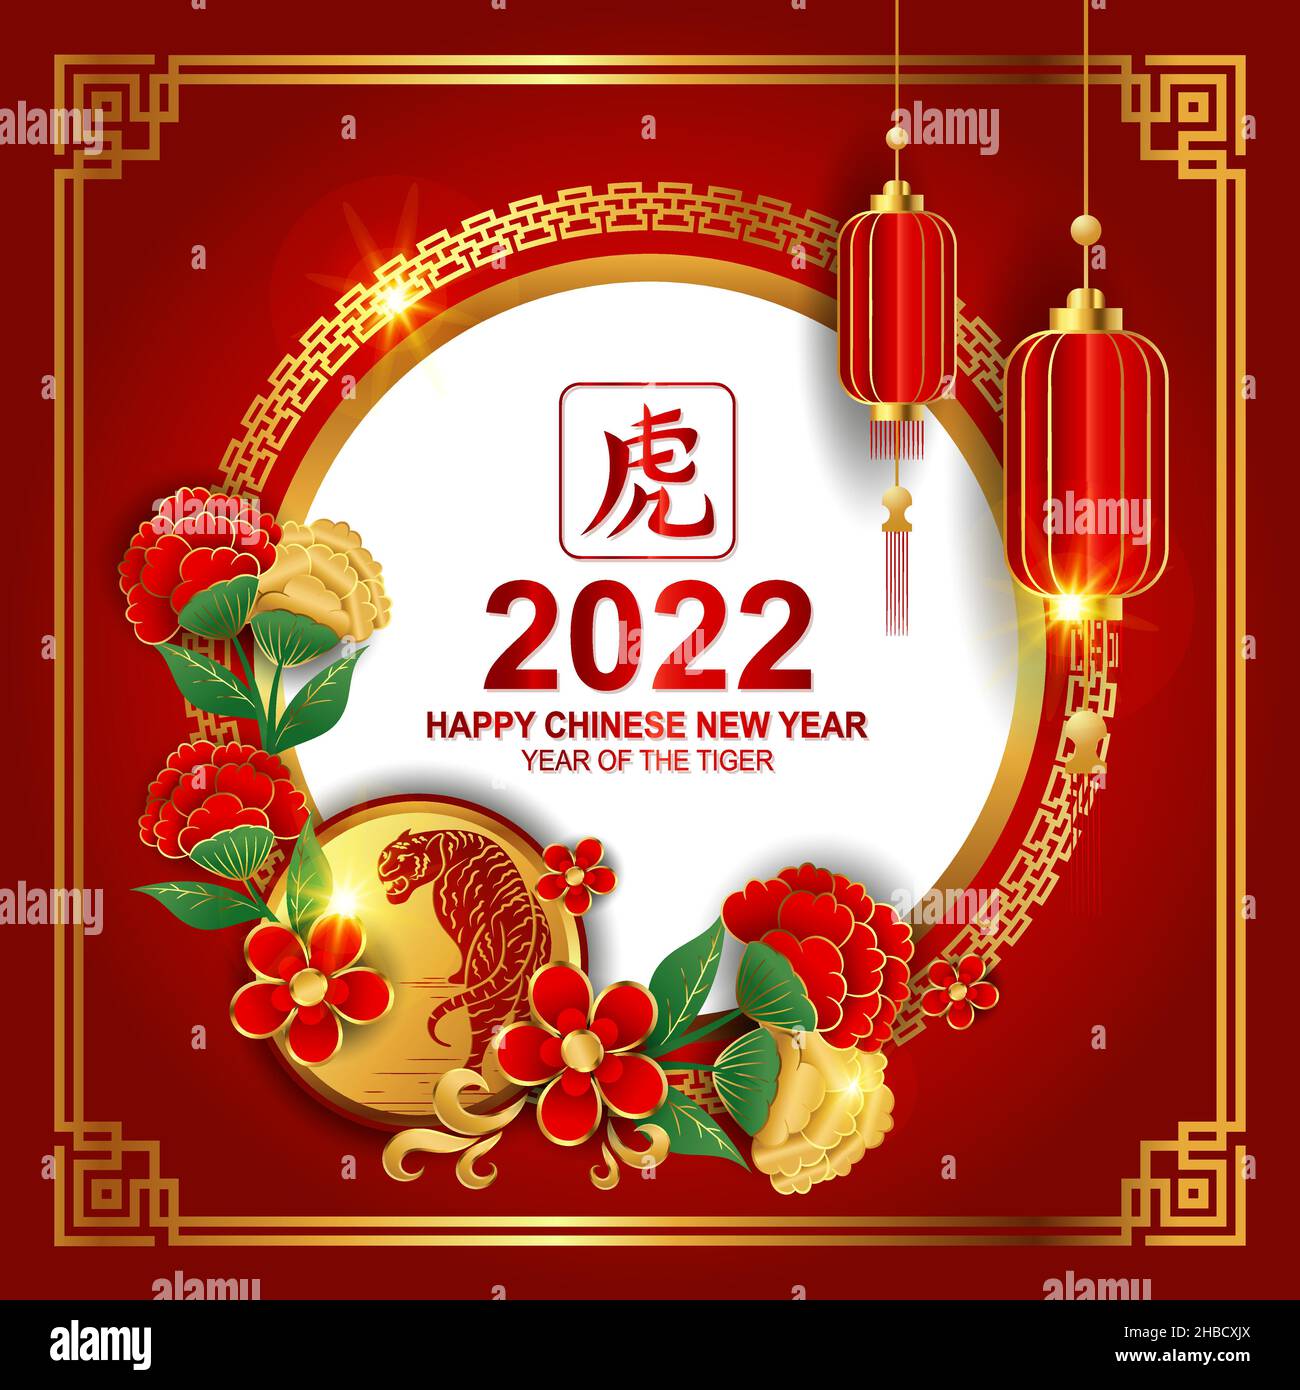 Golden Happy Chinese new year 2022 background with luxury and stylish background Stock Vector